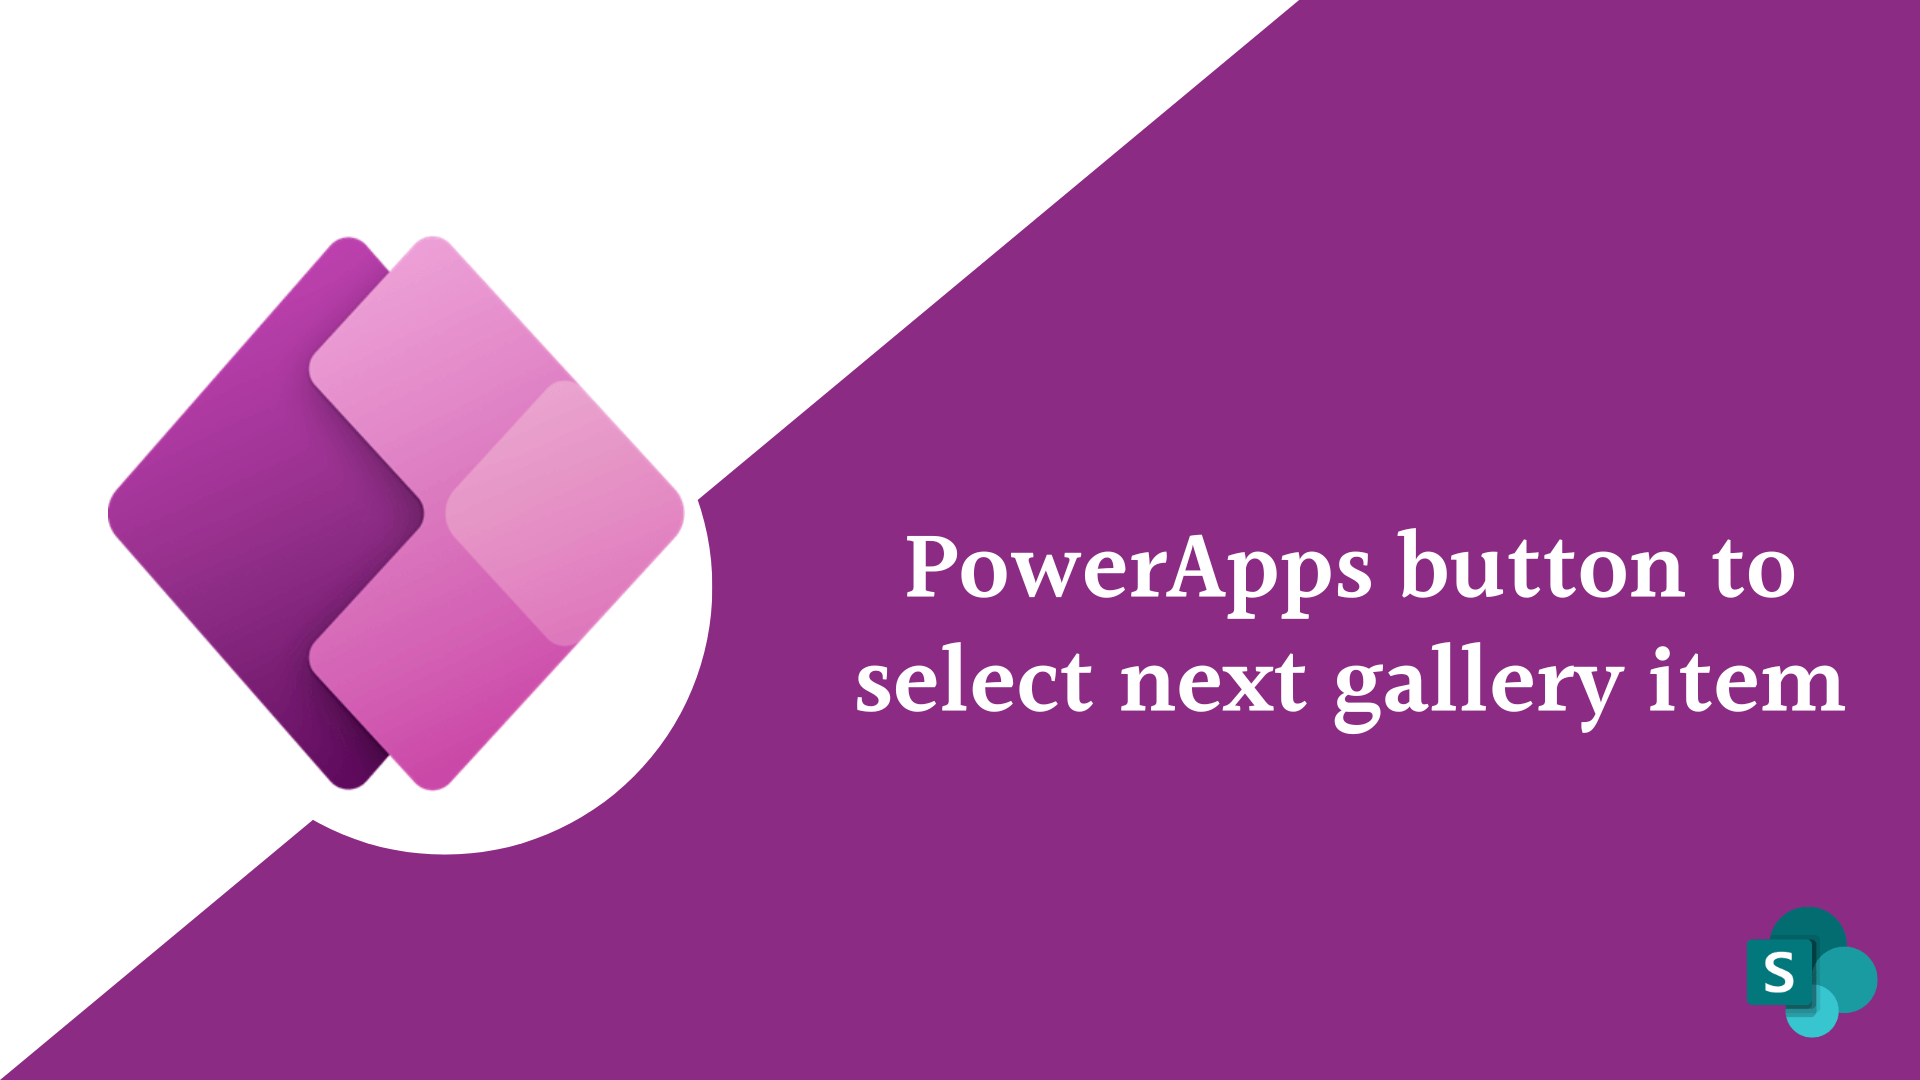 You are currently viewing PowerApps tips: PowerApps button to select next gallery item